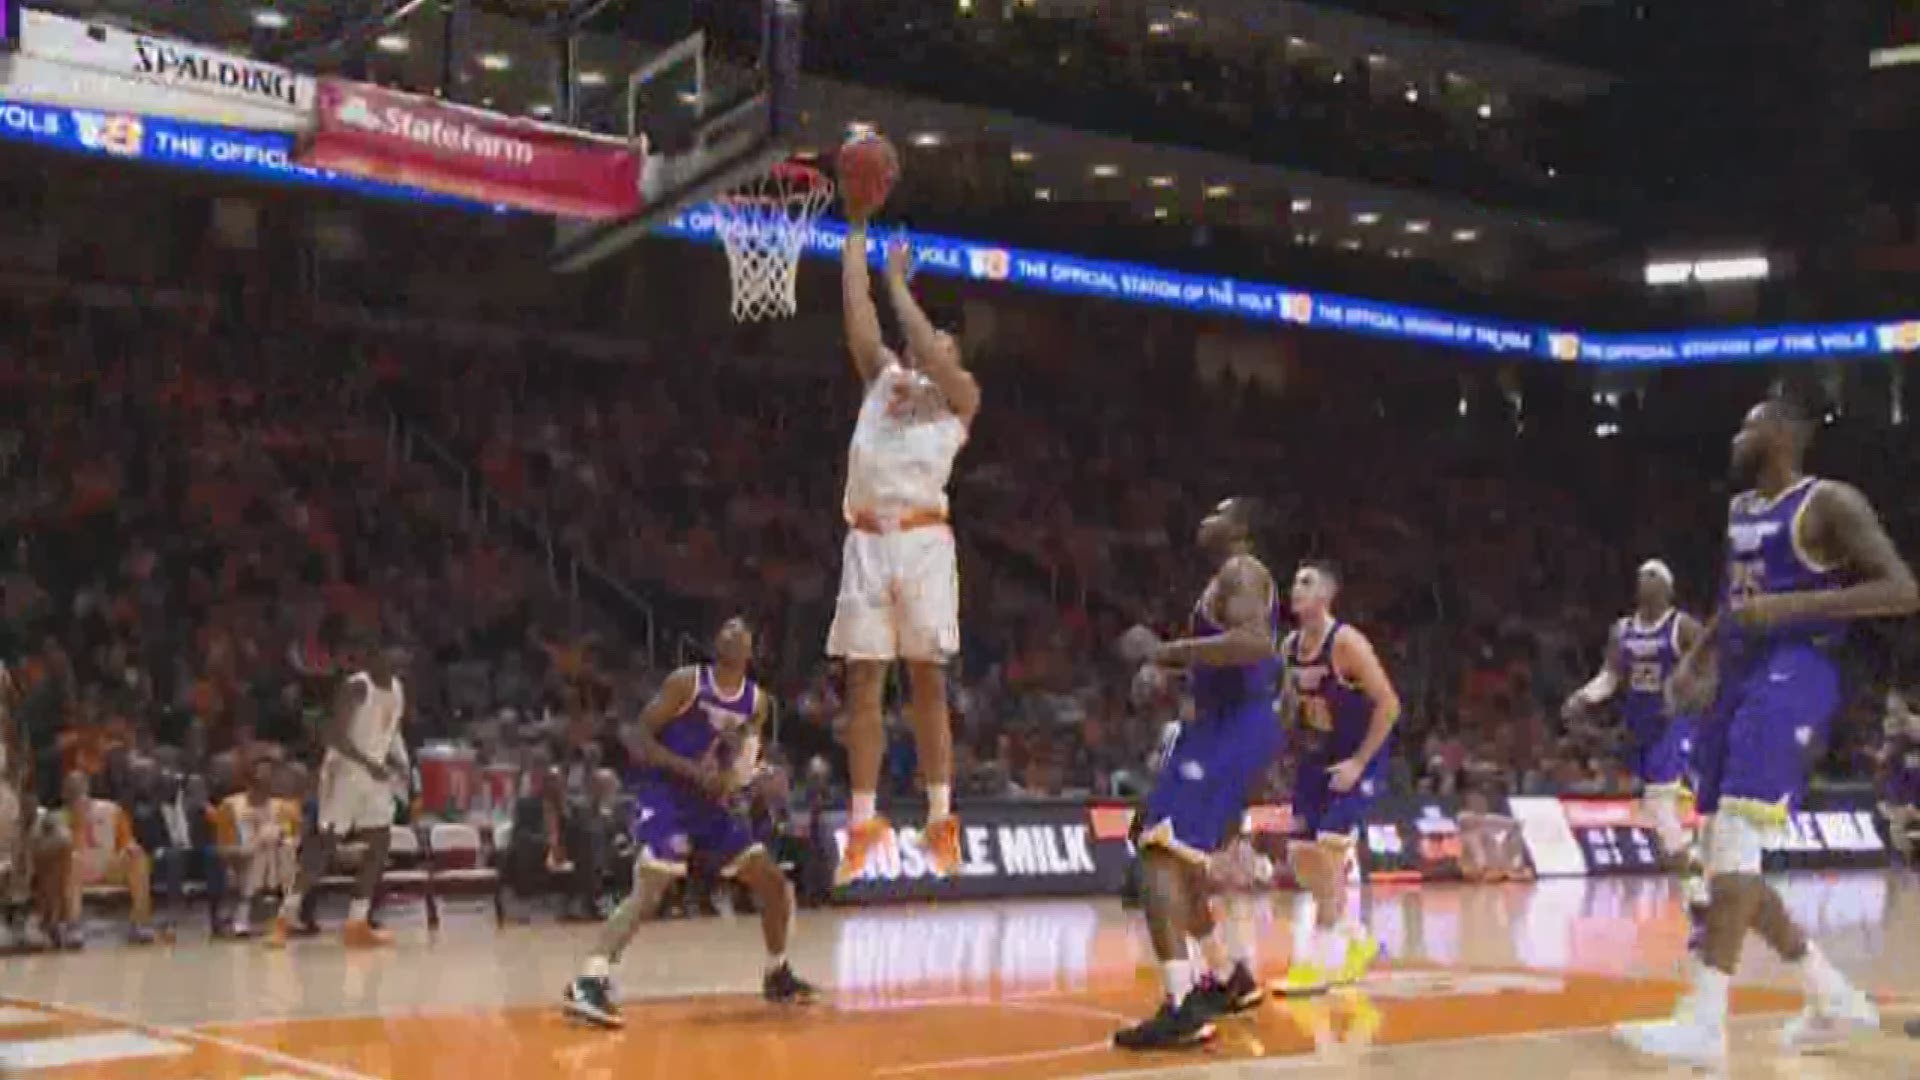 So many people are trying to get a glimpse of the number one ranked UT Men's Basketball team that the University had to open up additional seats in Thompson-Boling Arena for students.